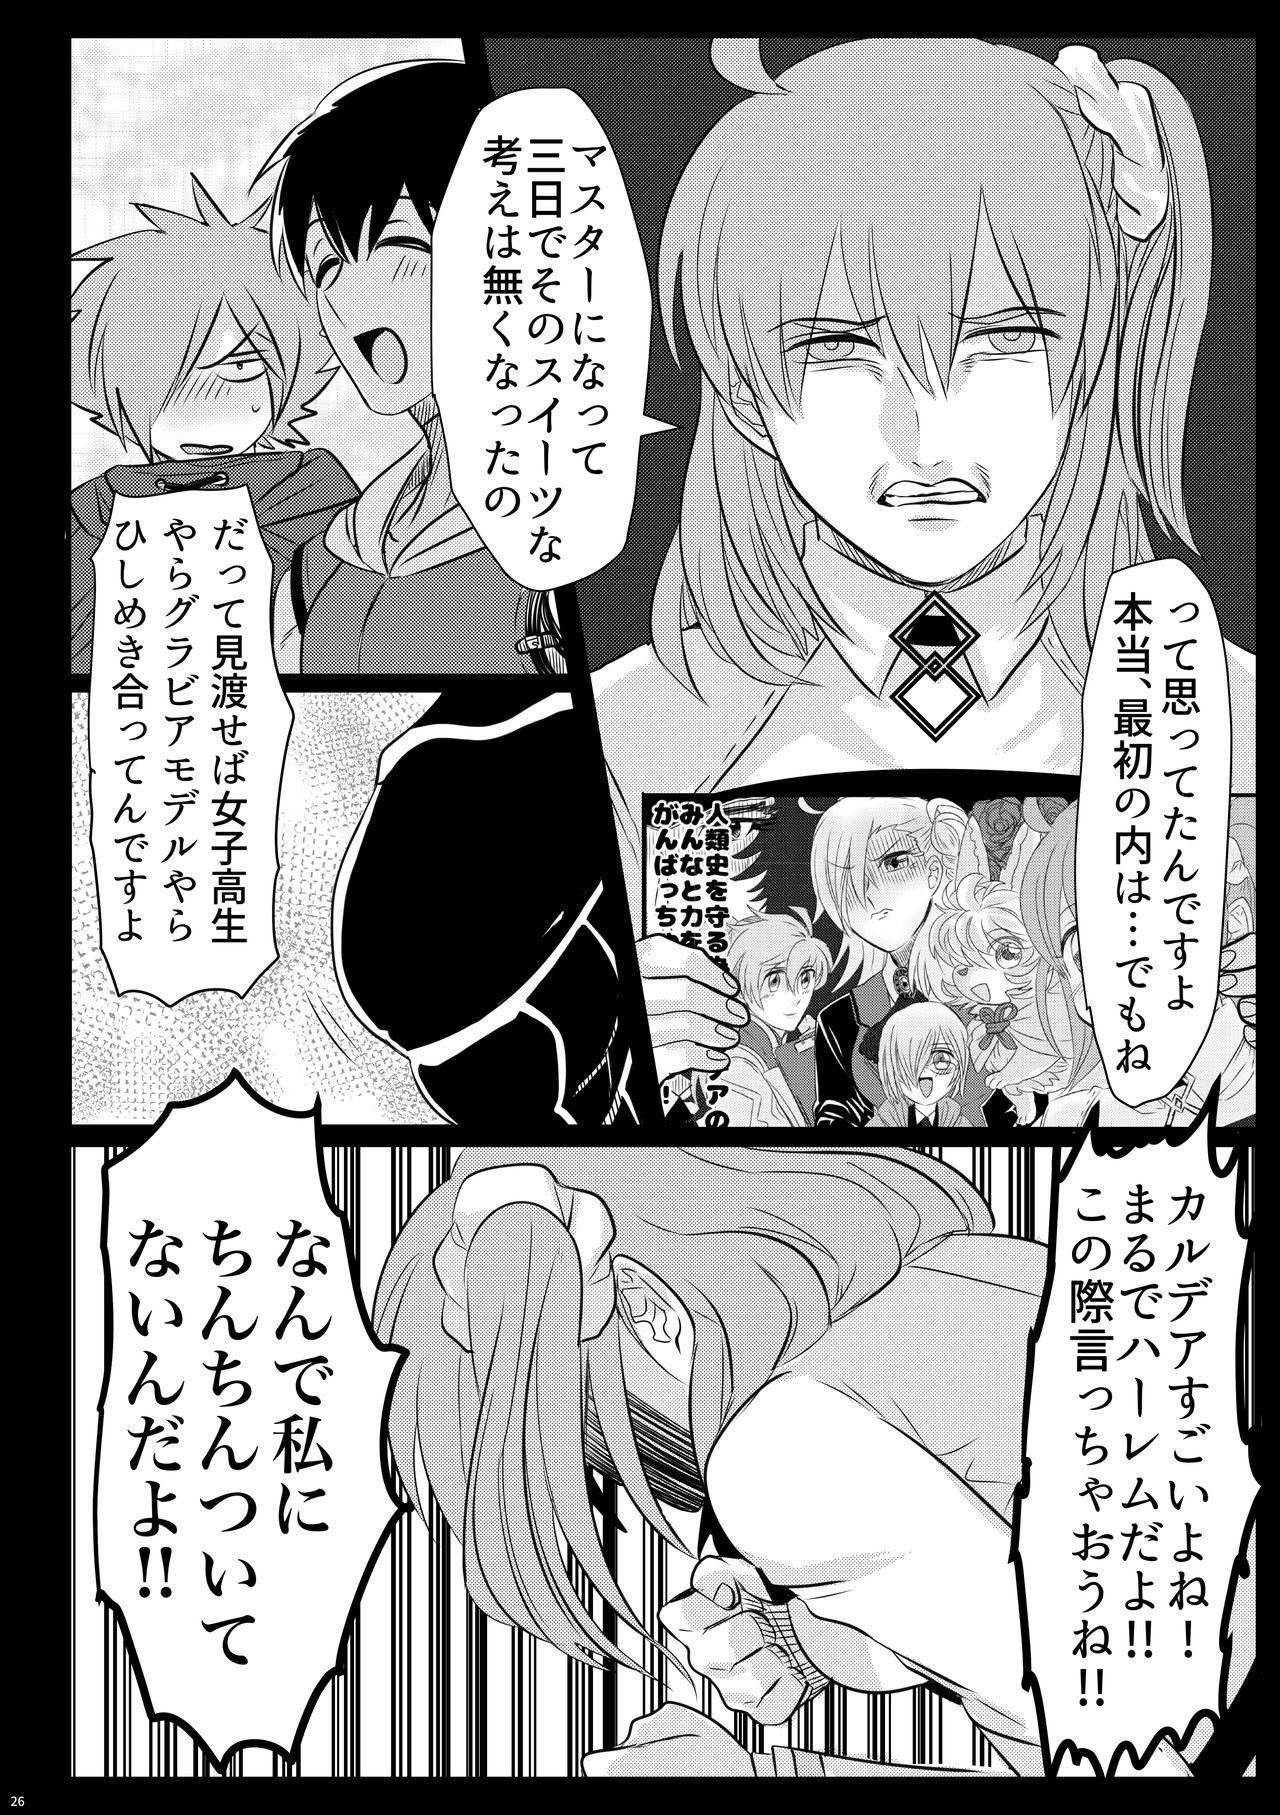 Ride 2016年に出したぐだ金本のぐだ金 - Fate grand order Gay Military - Page 2